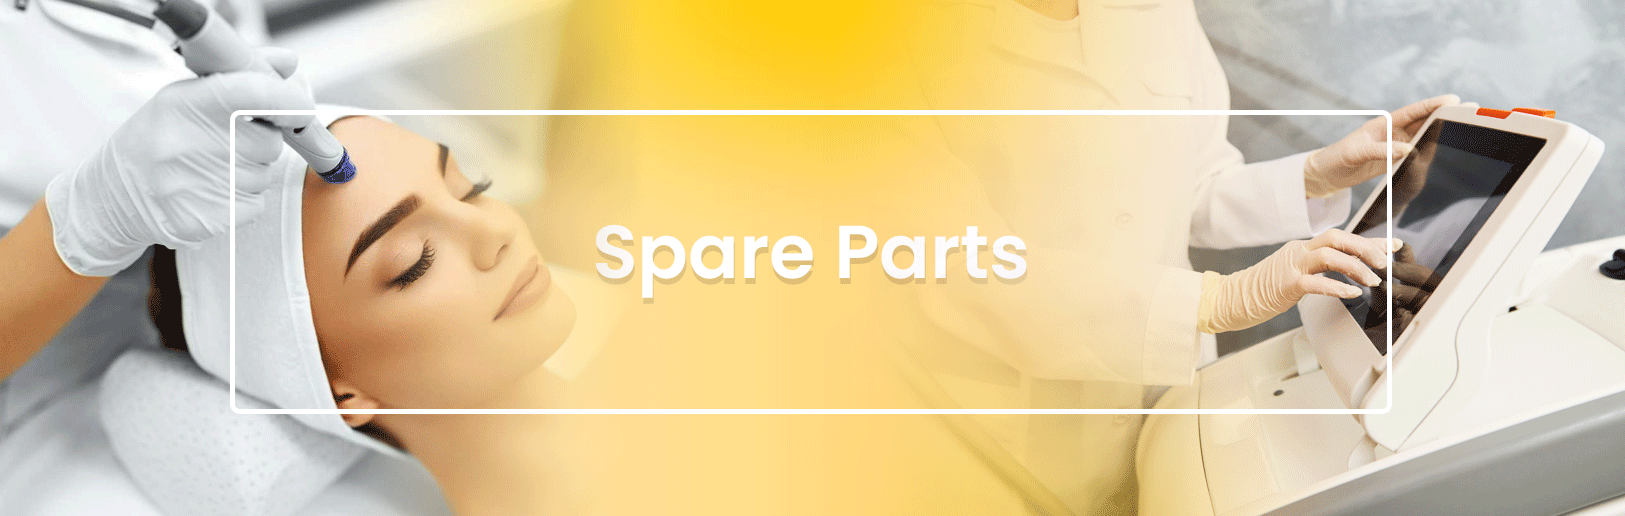 Spare Parts﻿ for laser equipments